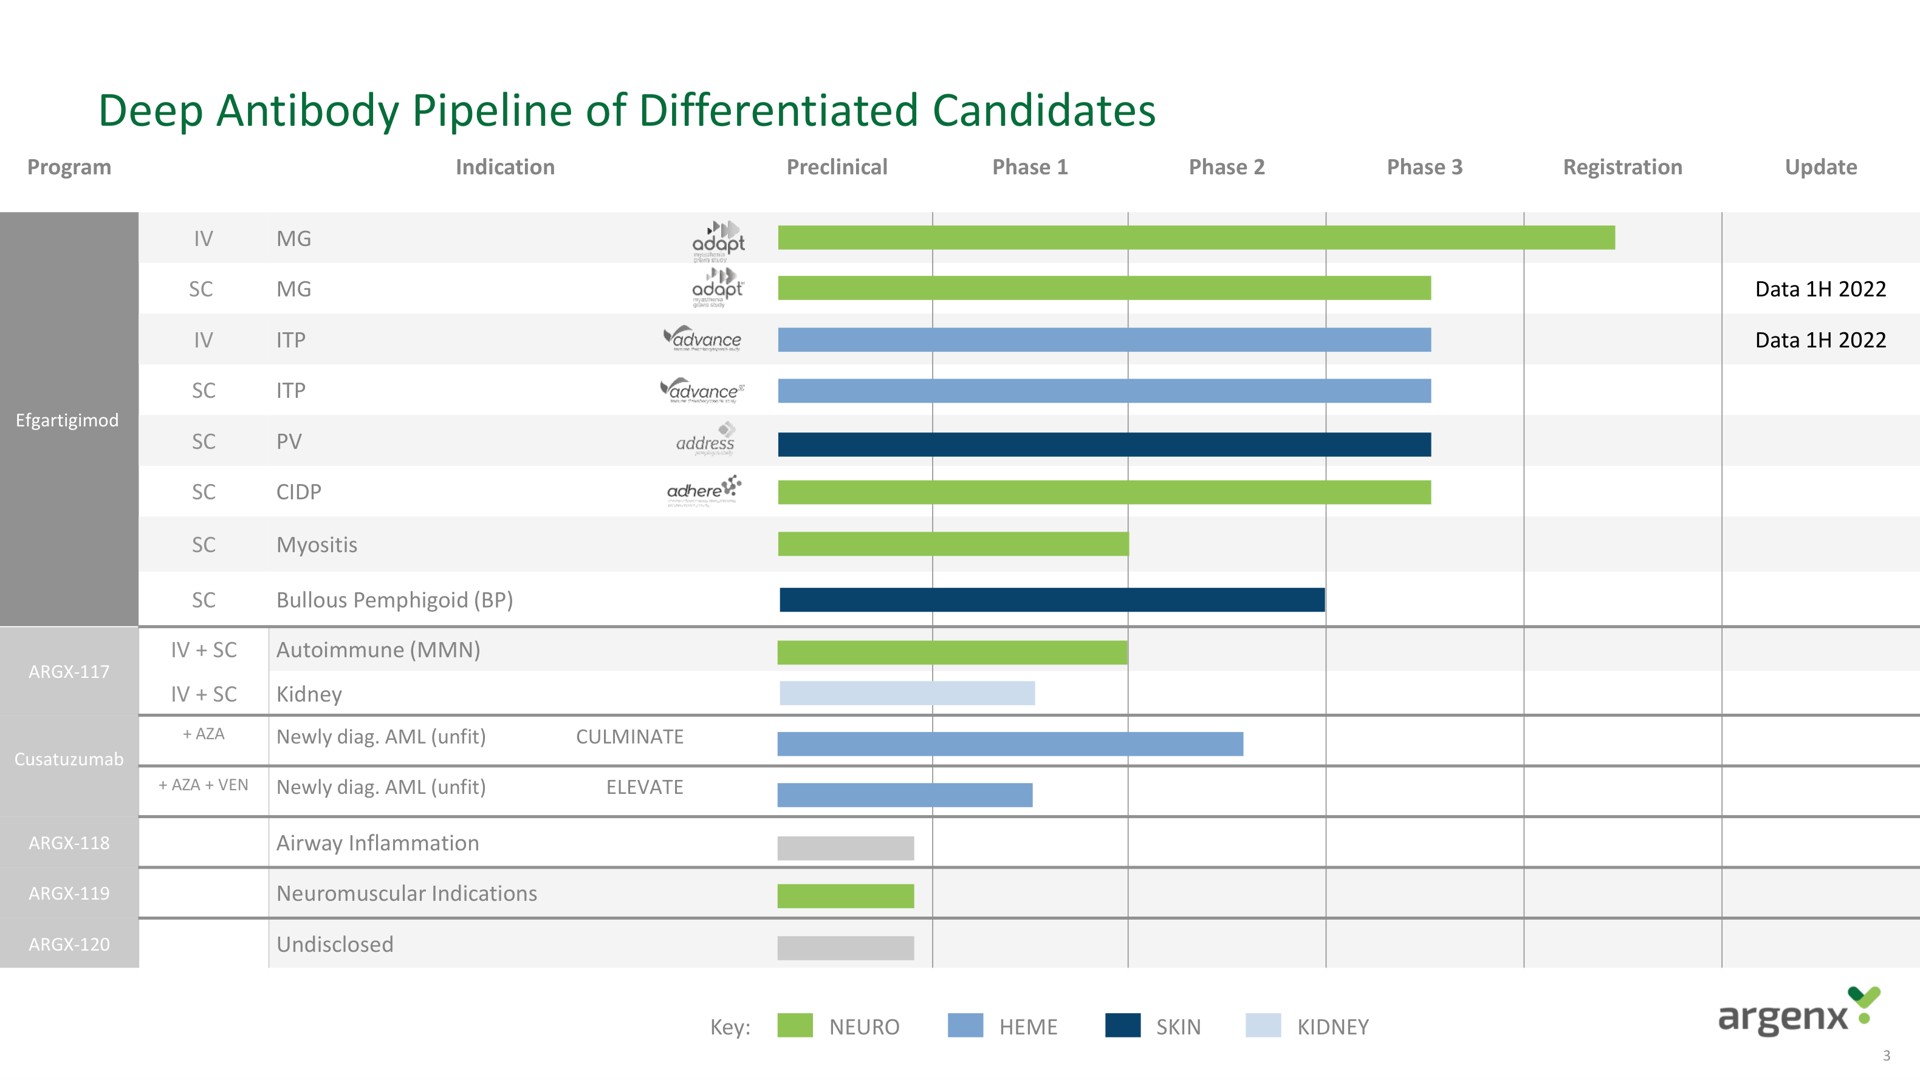 deep antibody pipeline of differentiated candidates | argenx SE